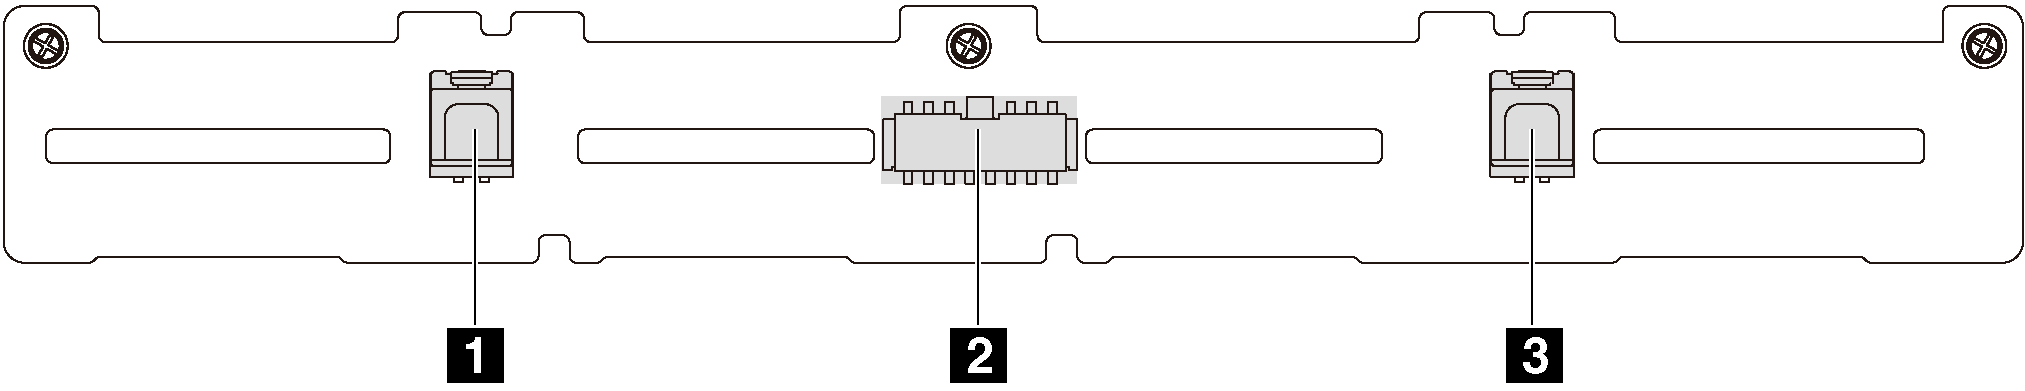 Connectors on the backplane for eight 2.5-inch SAS/SATA drives